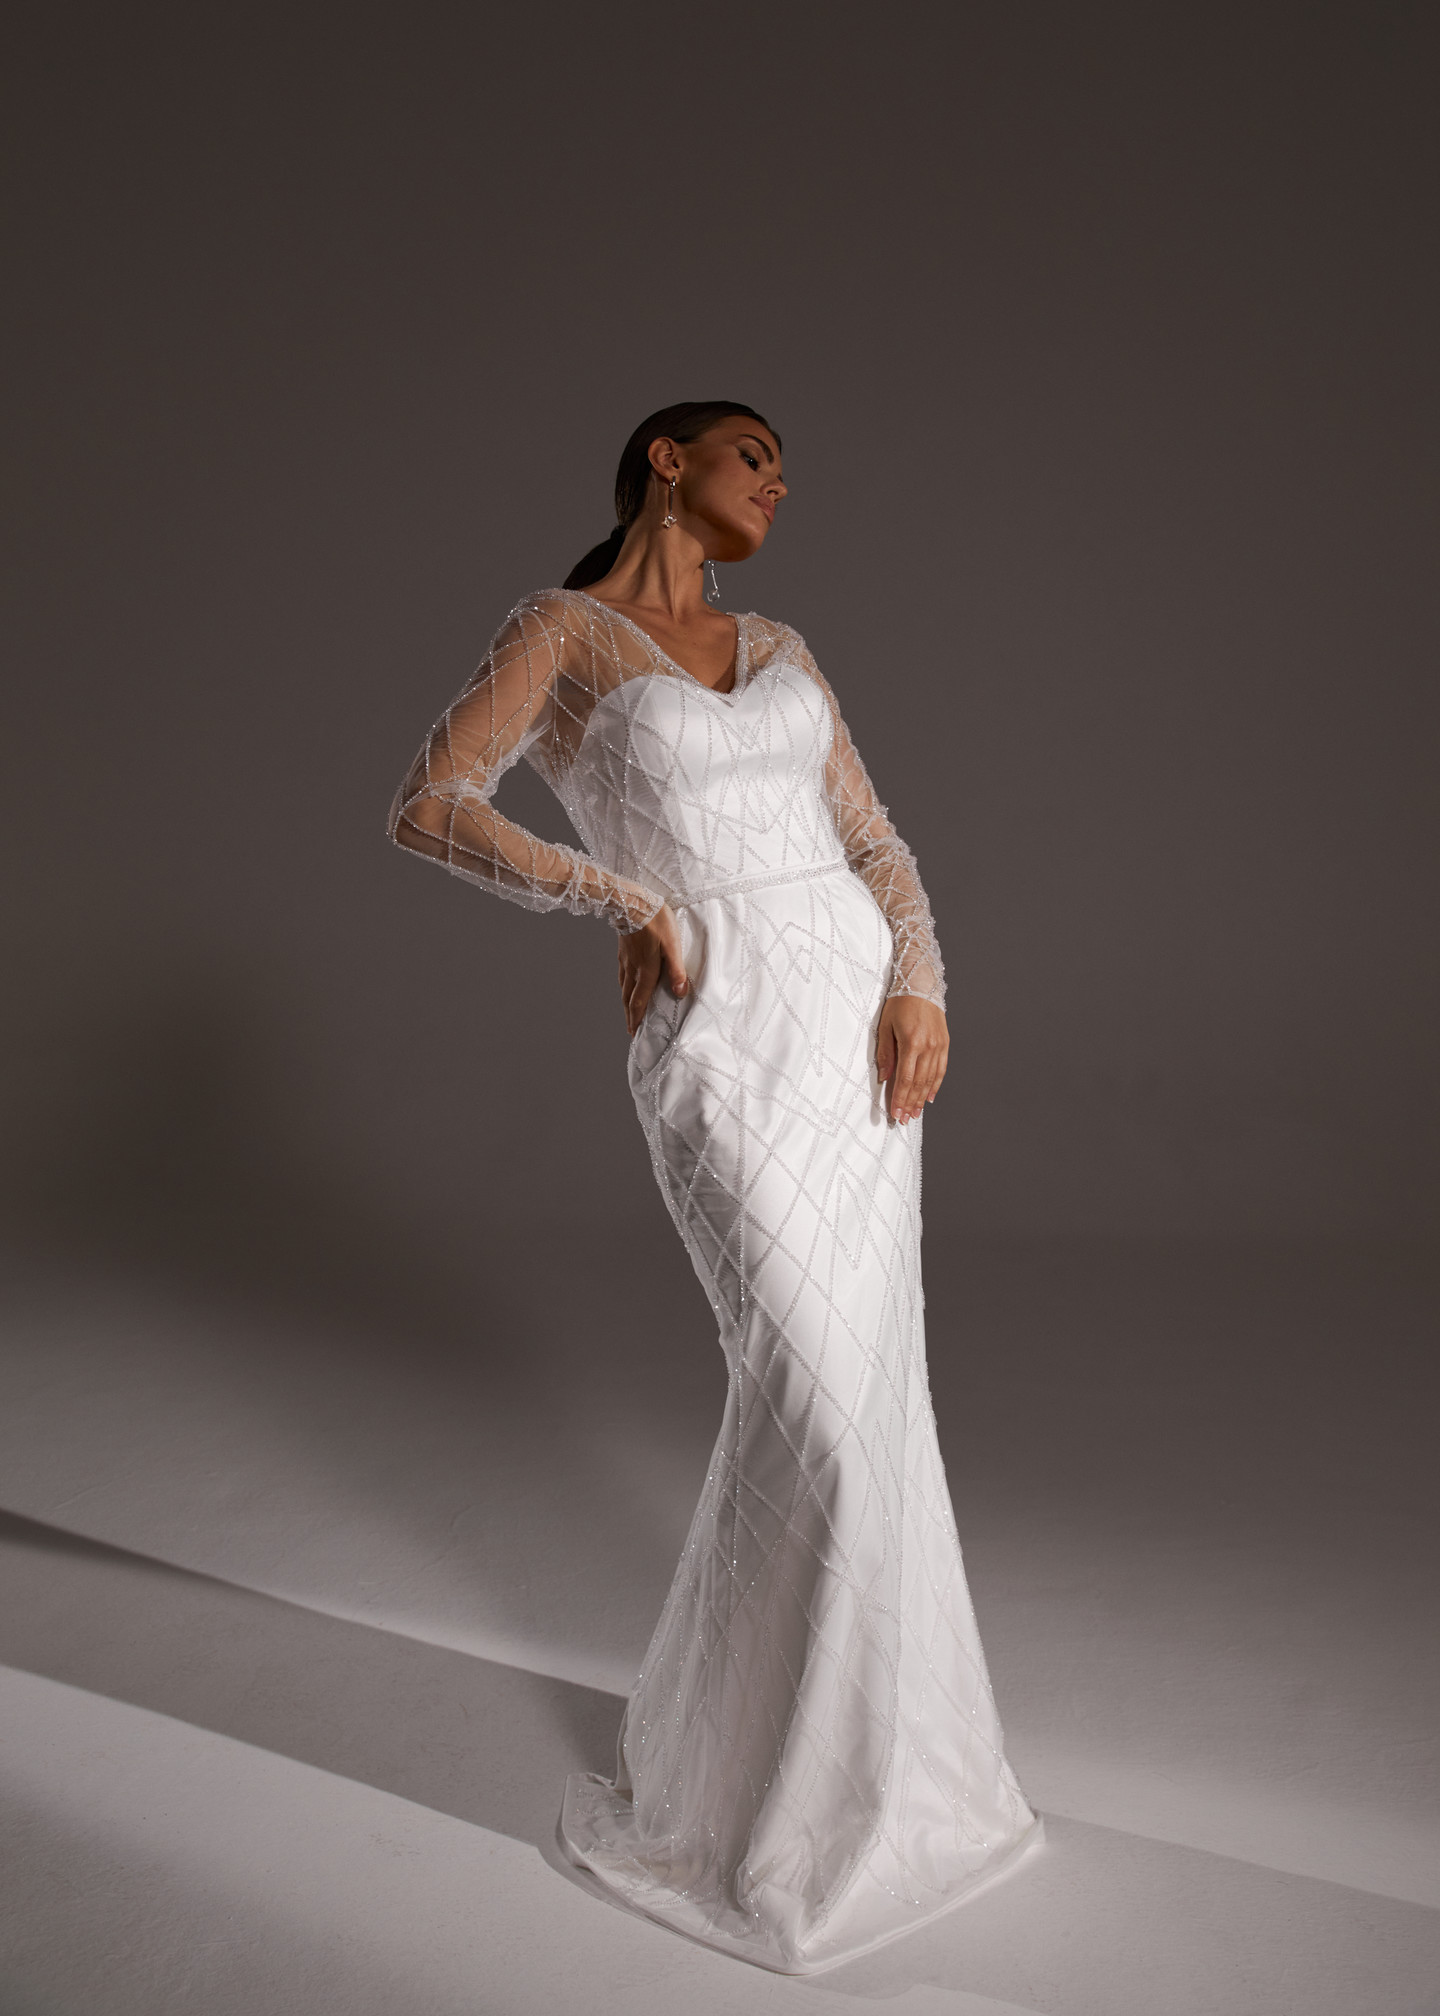 Celeste gown, 2019, couture, dress, bridal, off-white, embroidery, sleeves, sheath silhouette, popular